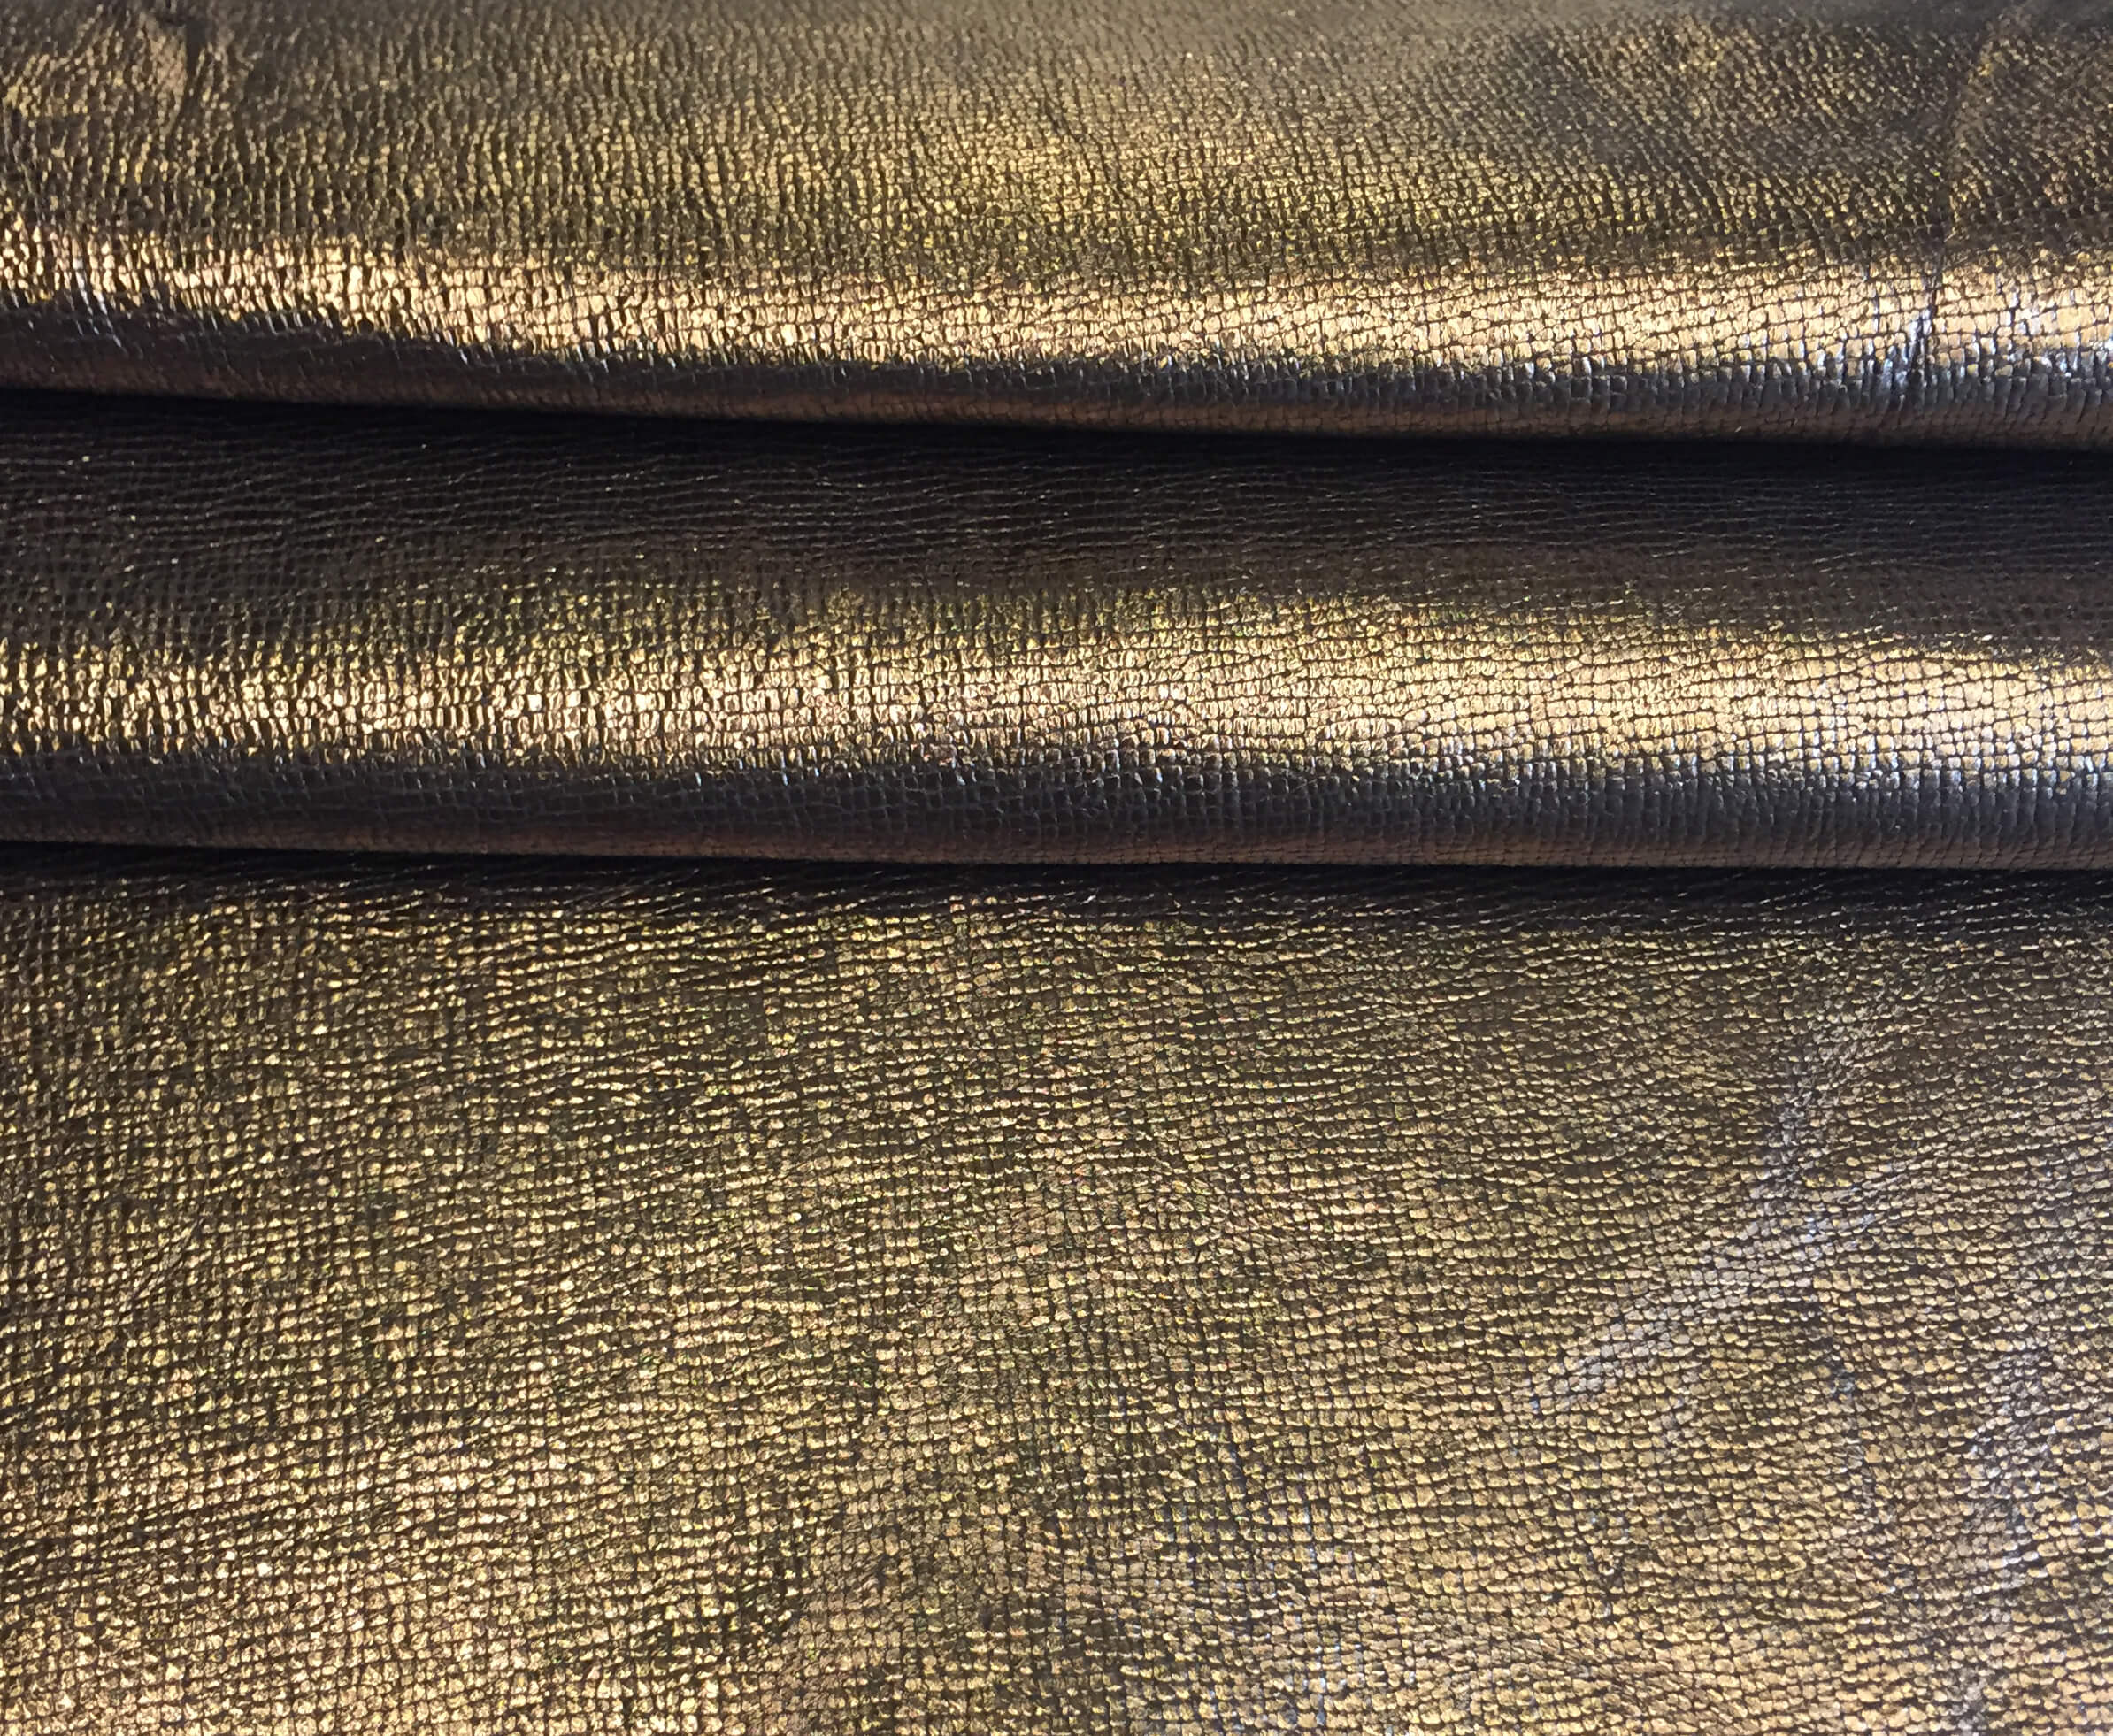 On Sale Genuine Leather Hides Sewing Fabric